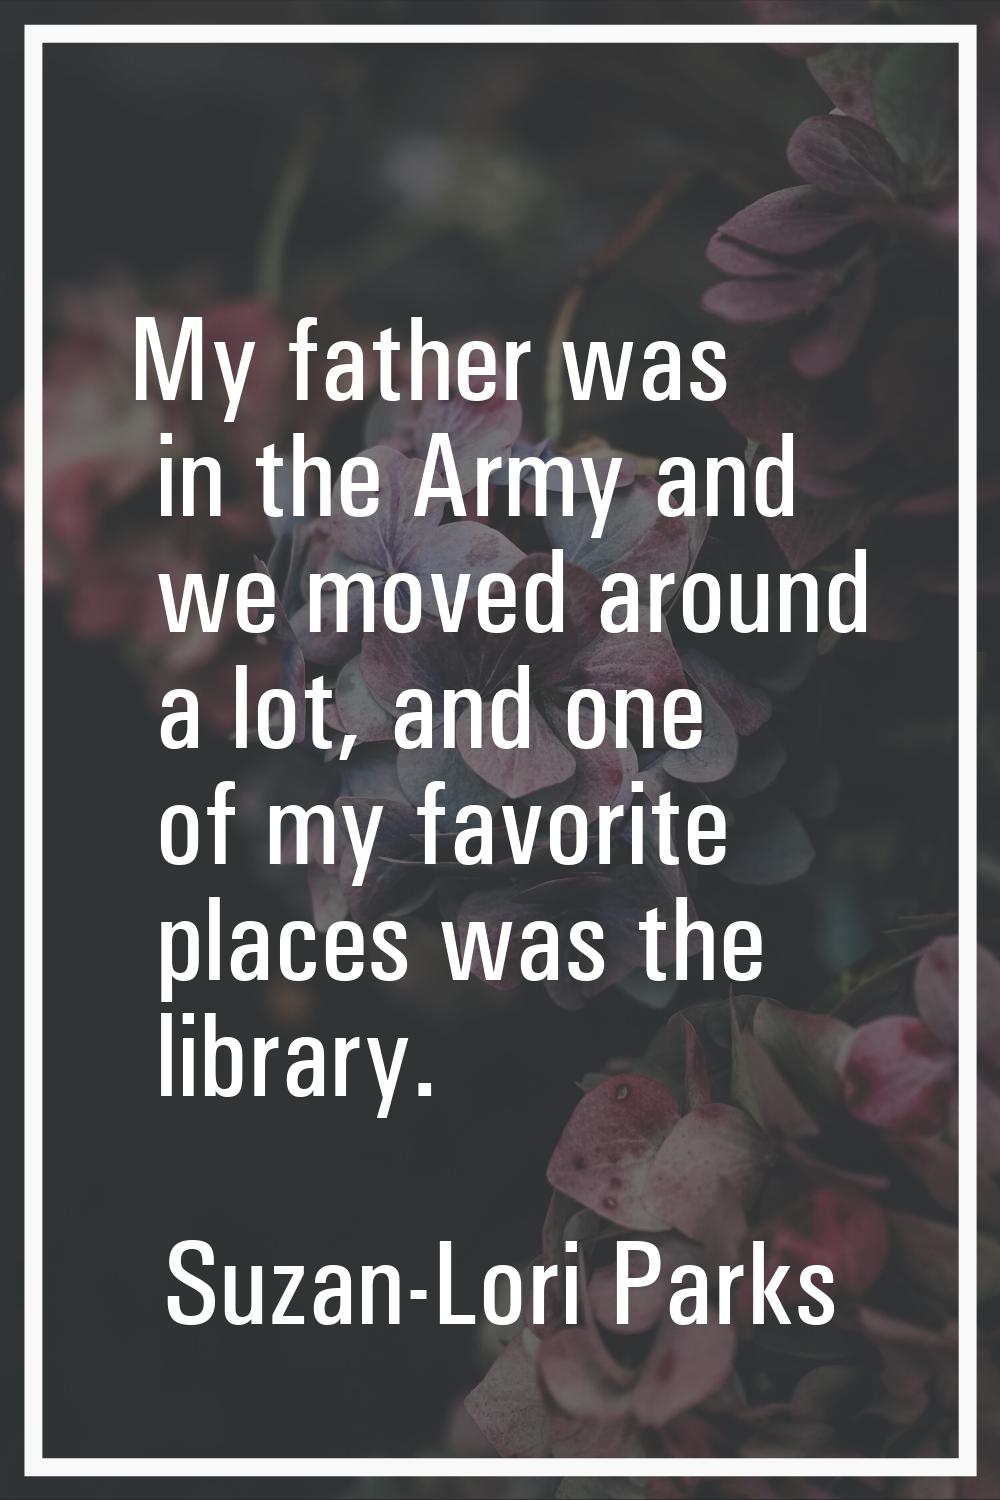 My father was in the Army and we moved around a lot, and one of my favorite places was the library.